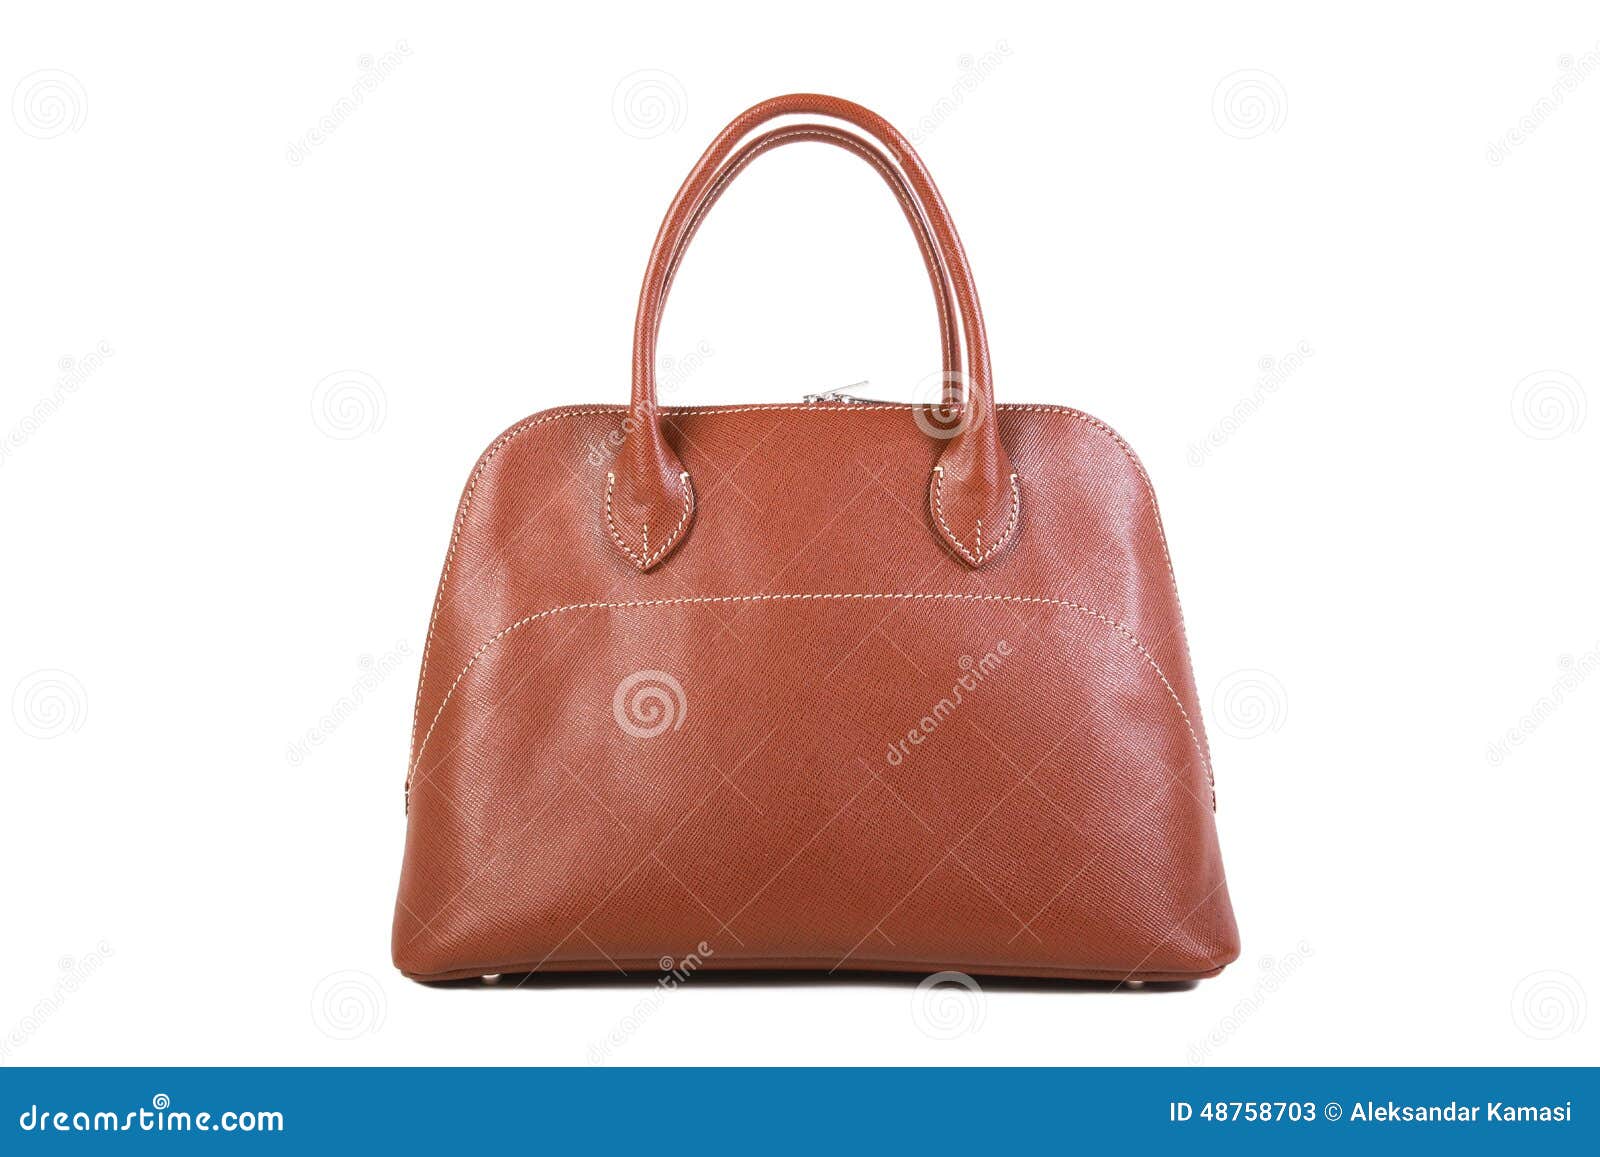 Brown Leather Handbag stock image. Image of clasp, casual - 48758703